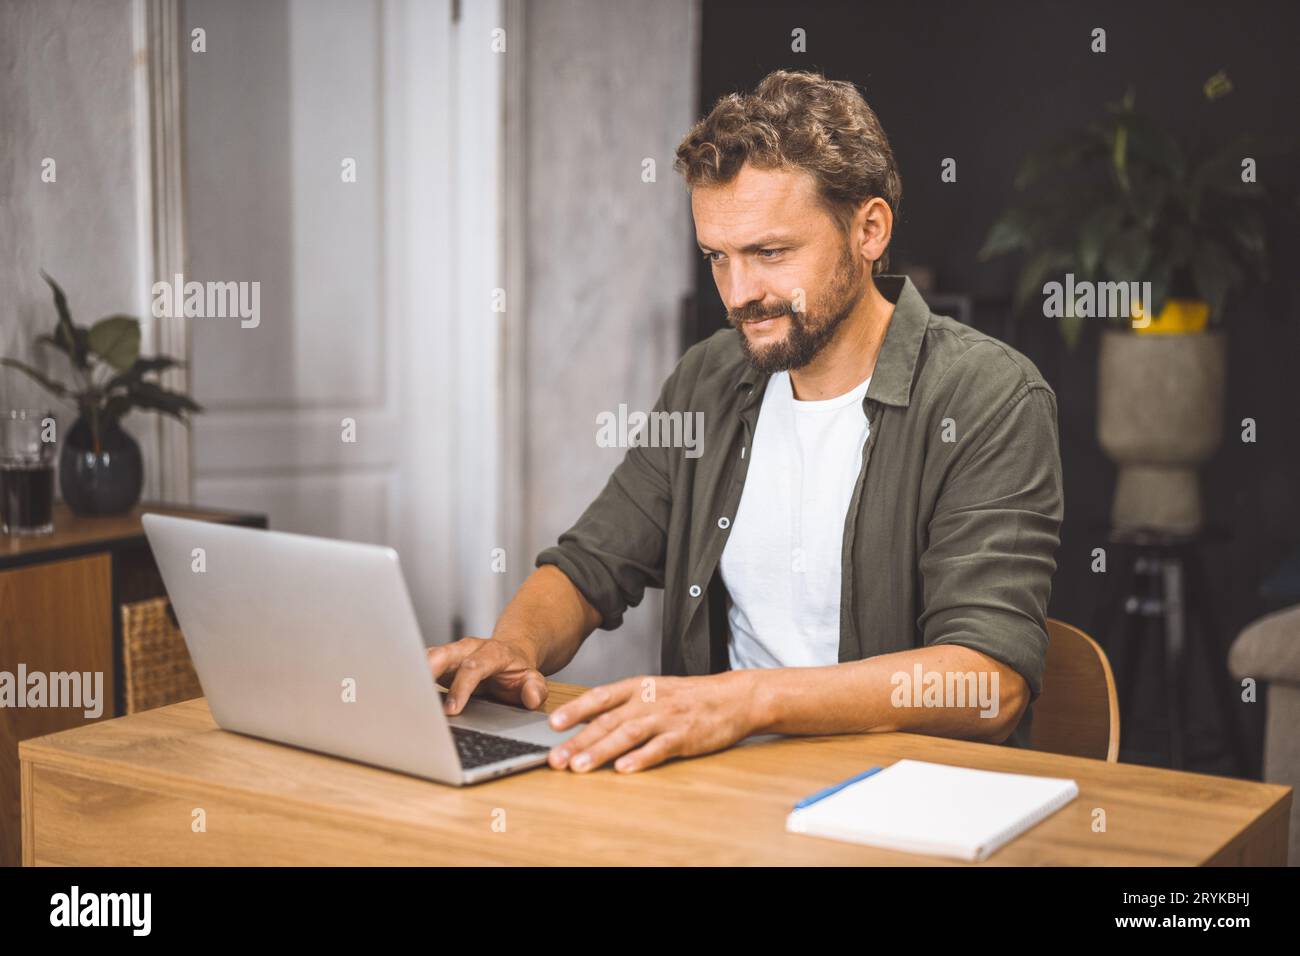 Modern freelancer lifestyle, man intently focused on laptop, sitting in cozy home office. Concept of working from home, emphasiz Stock Photo